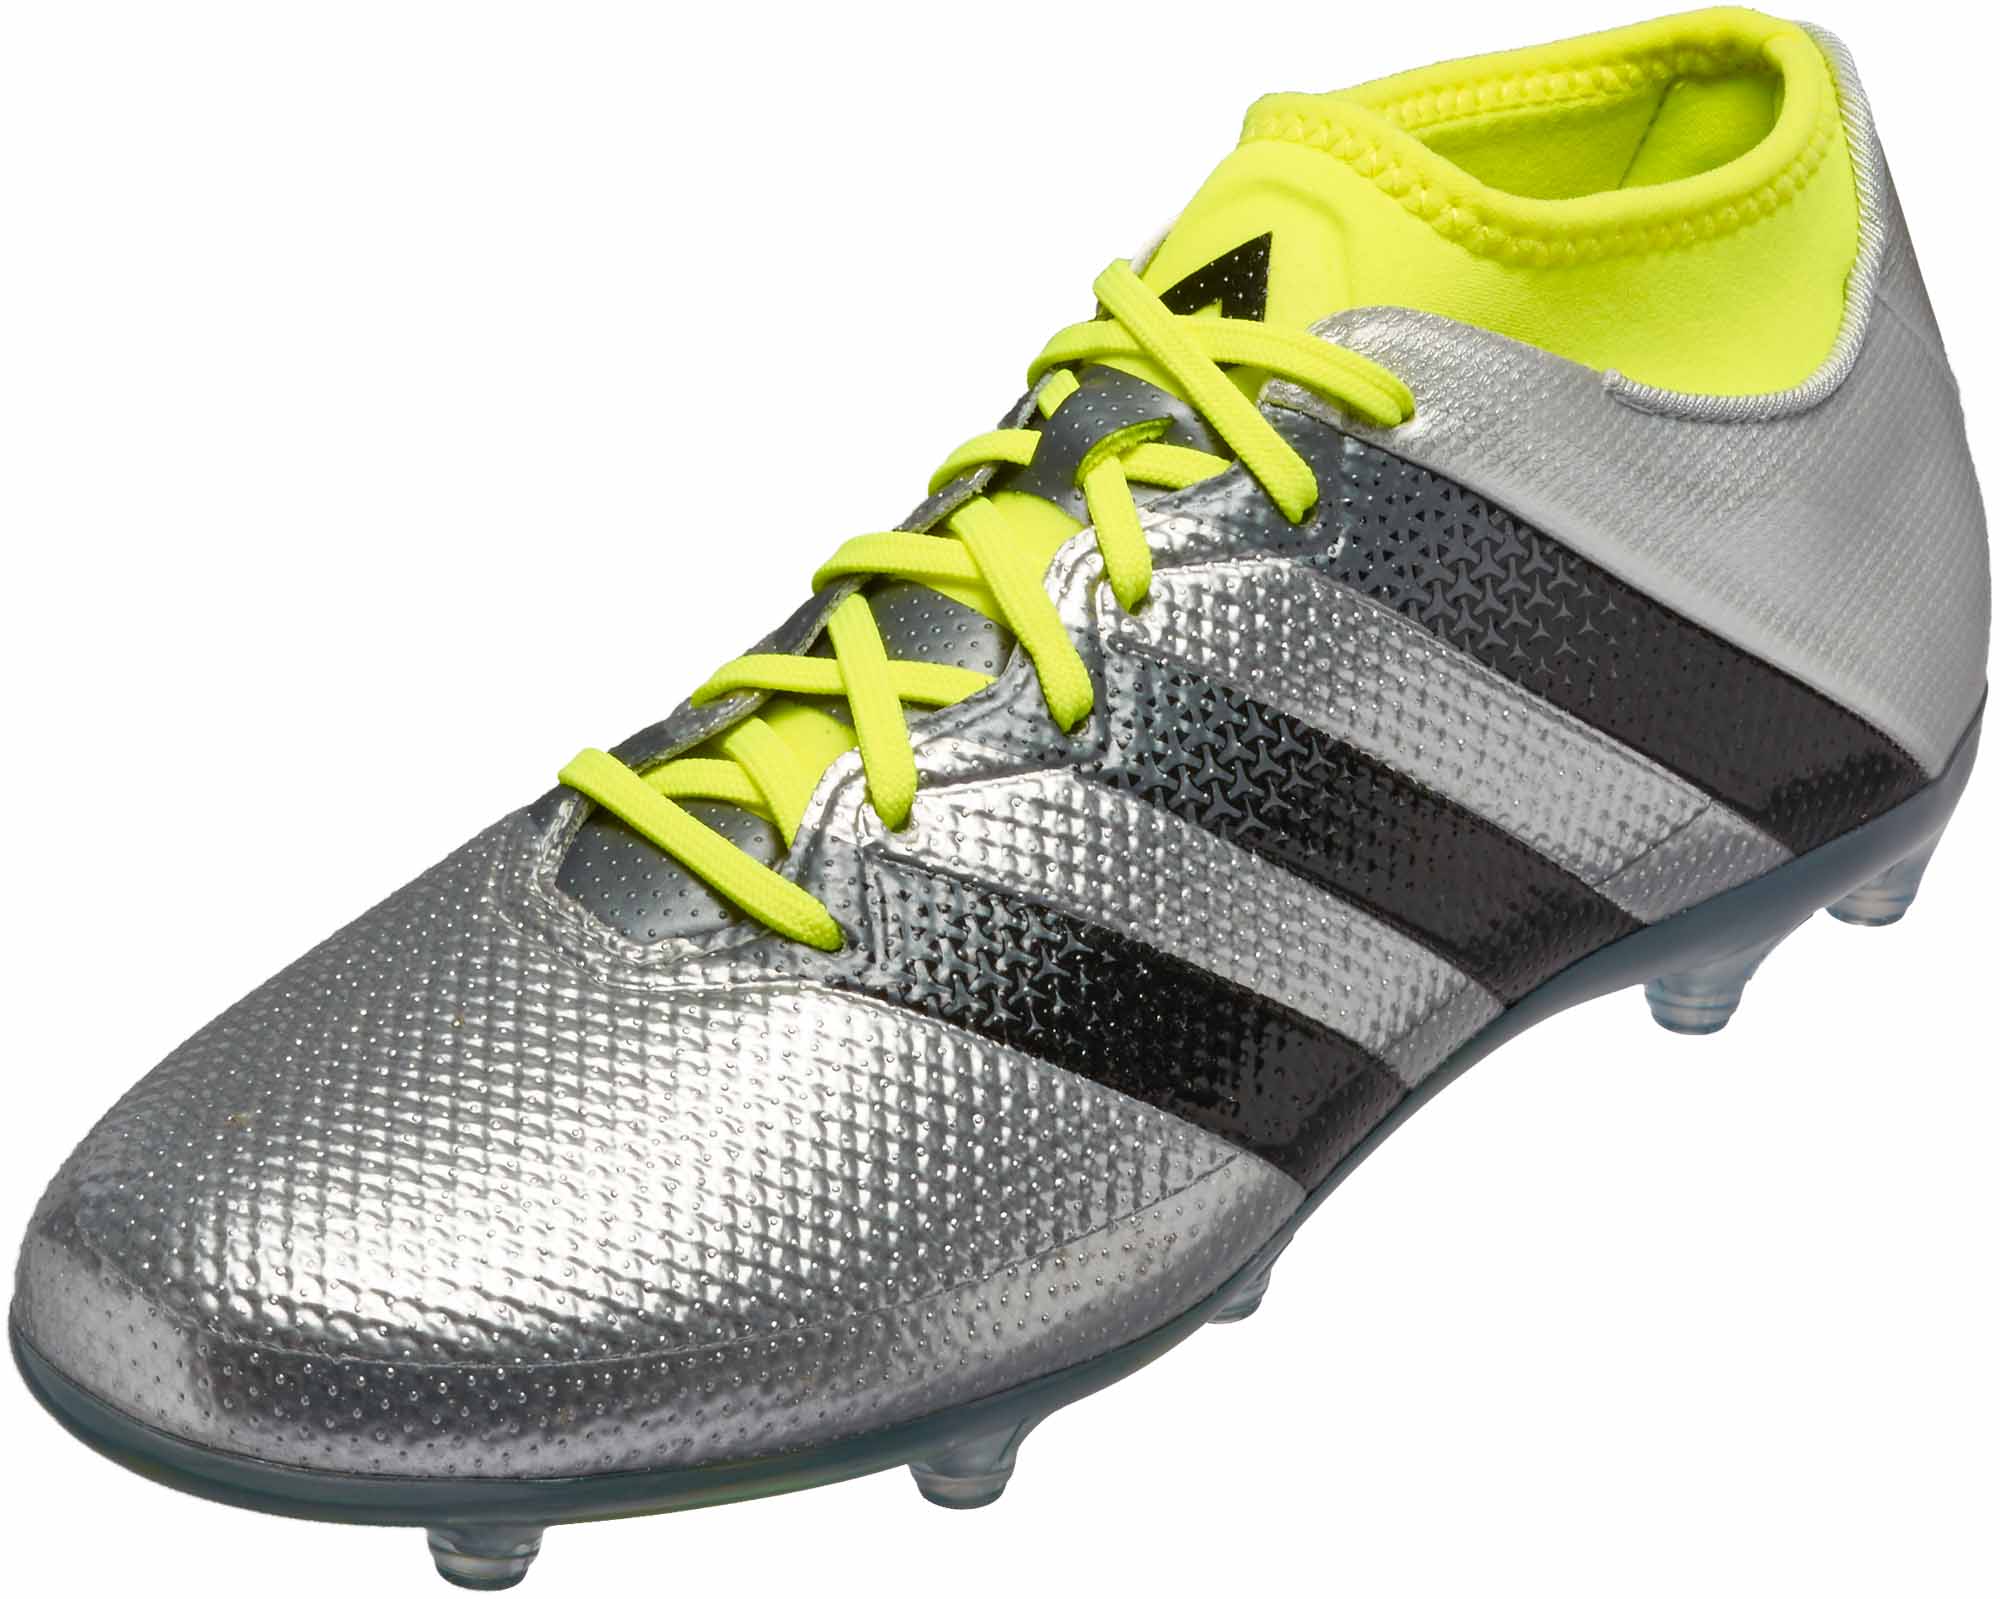 adidas silver soccer cleats